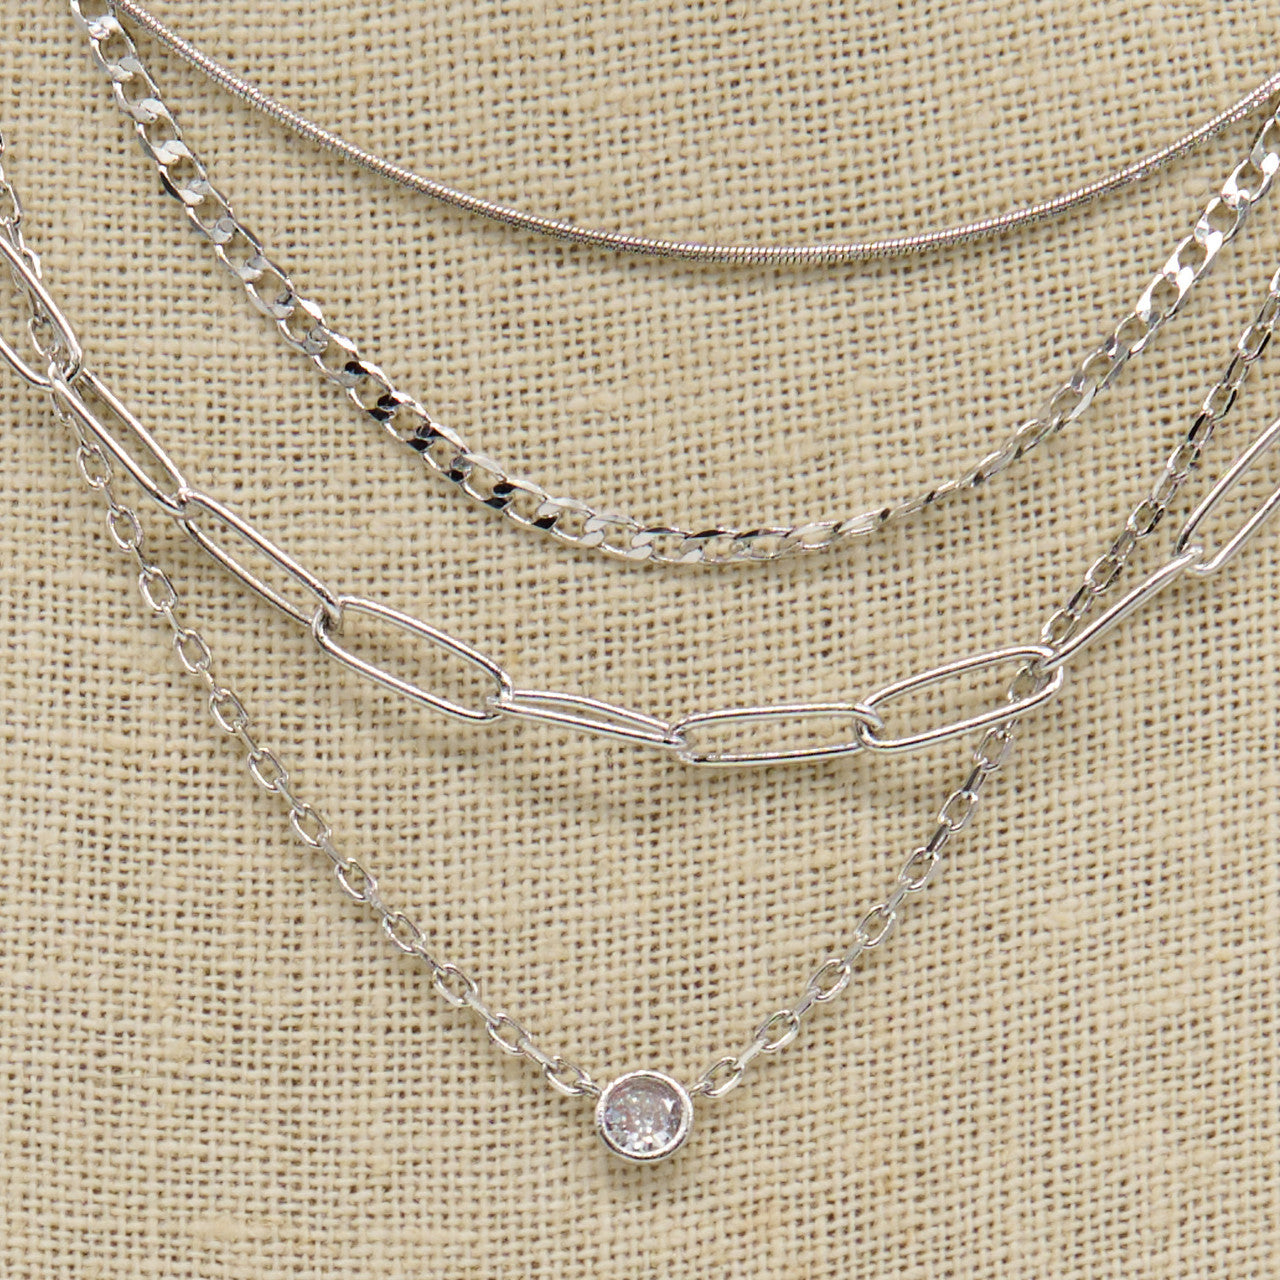 4 Row Layered Mixed Chain Necklace